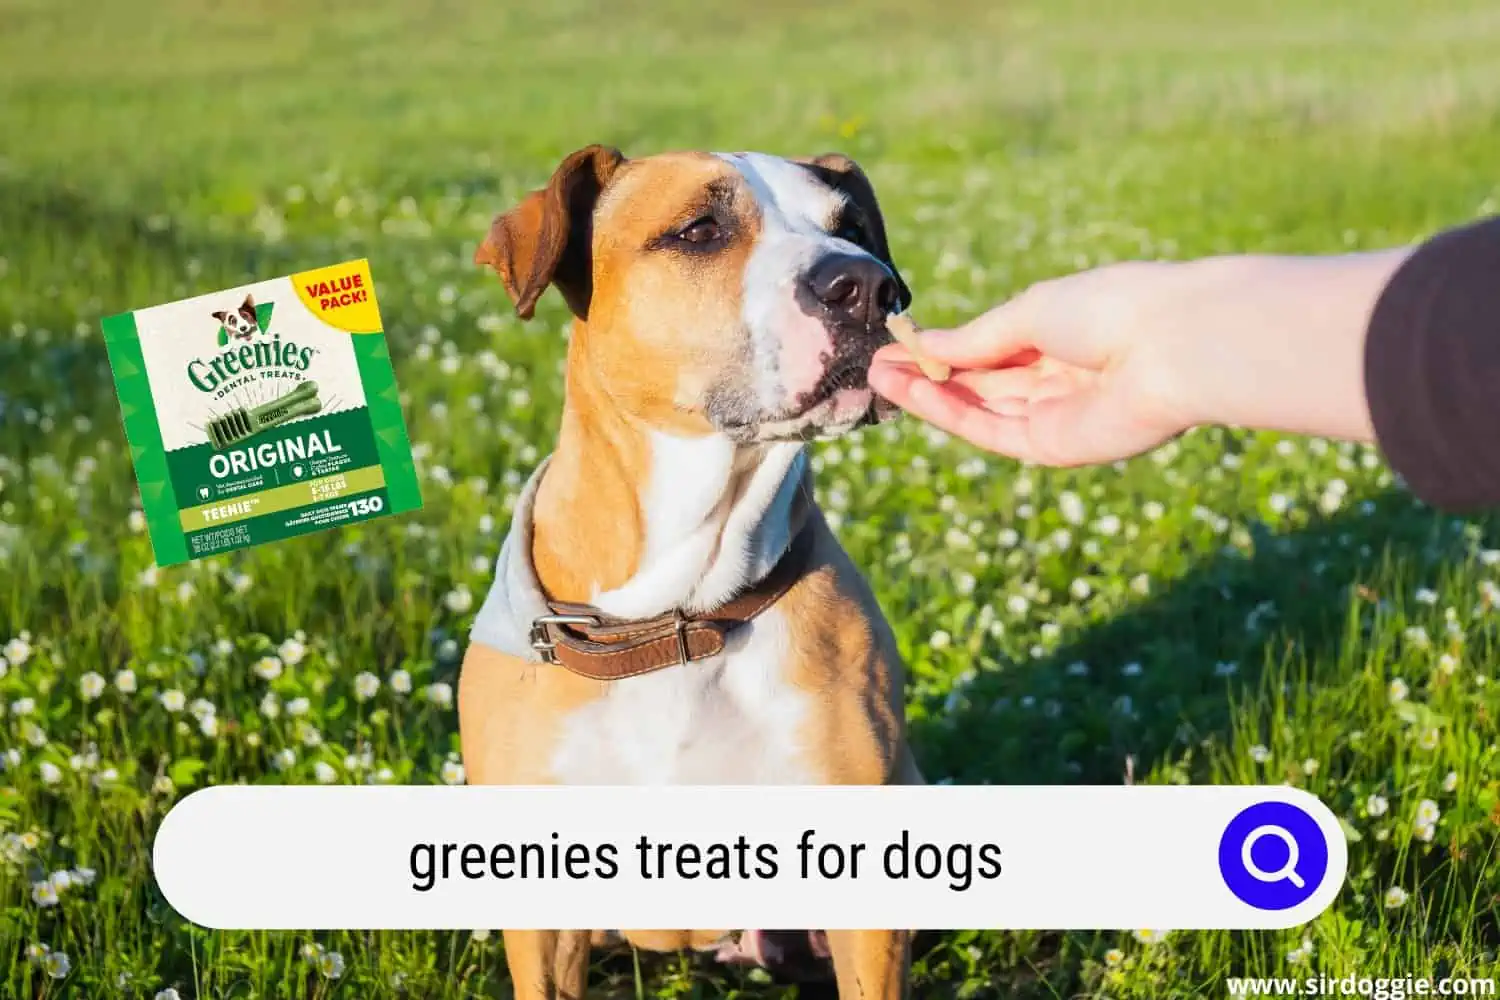 greenies treats for dogs